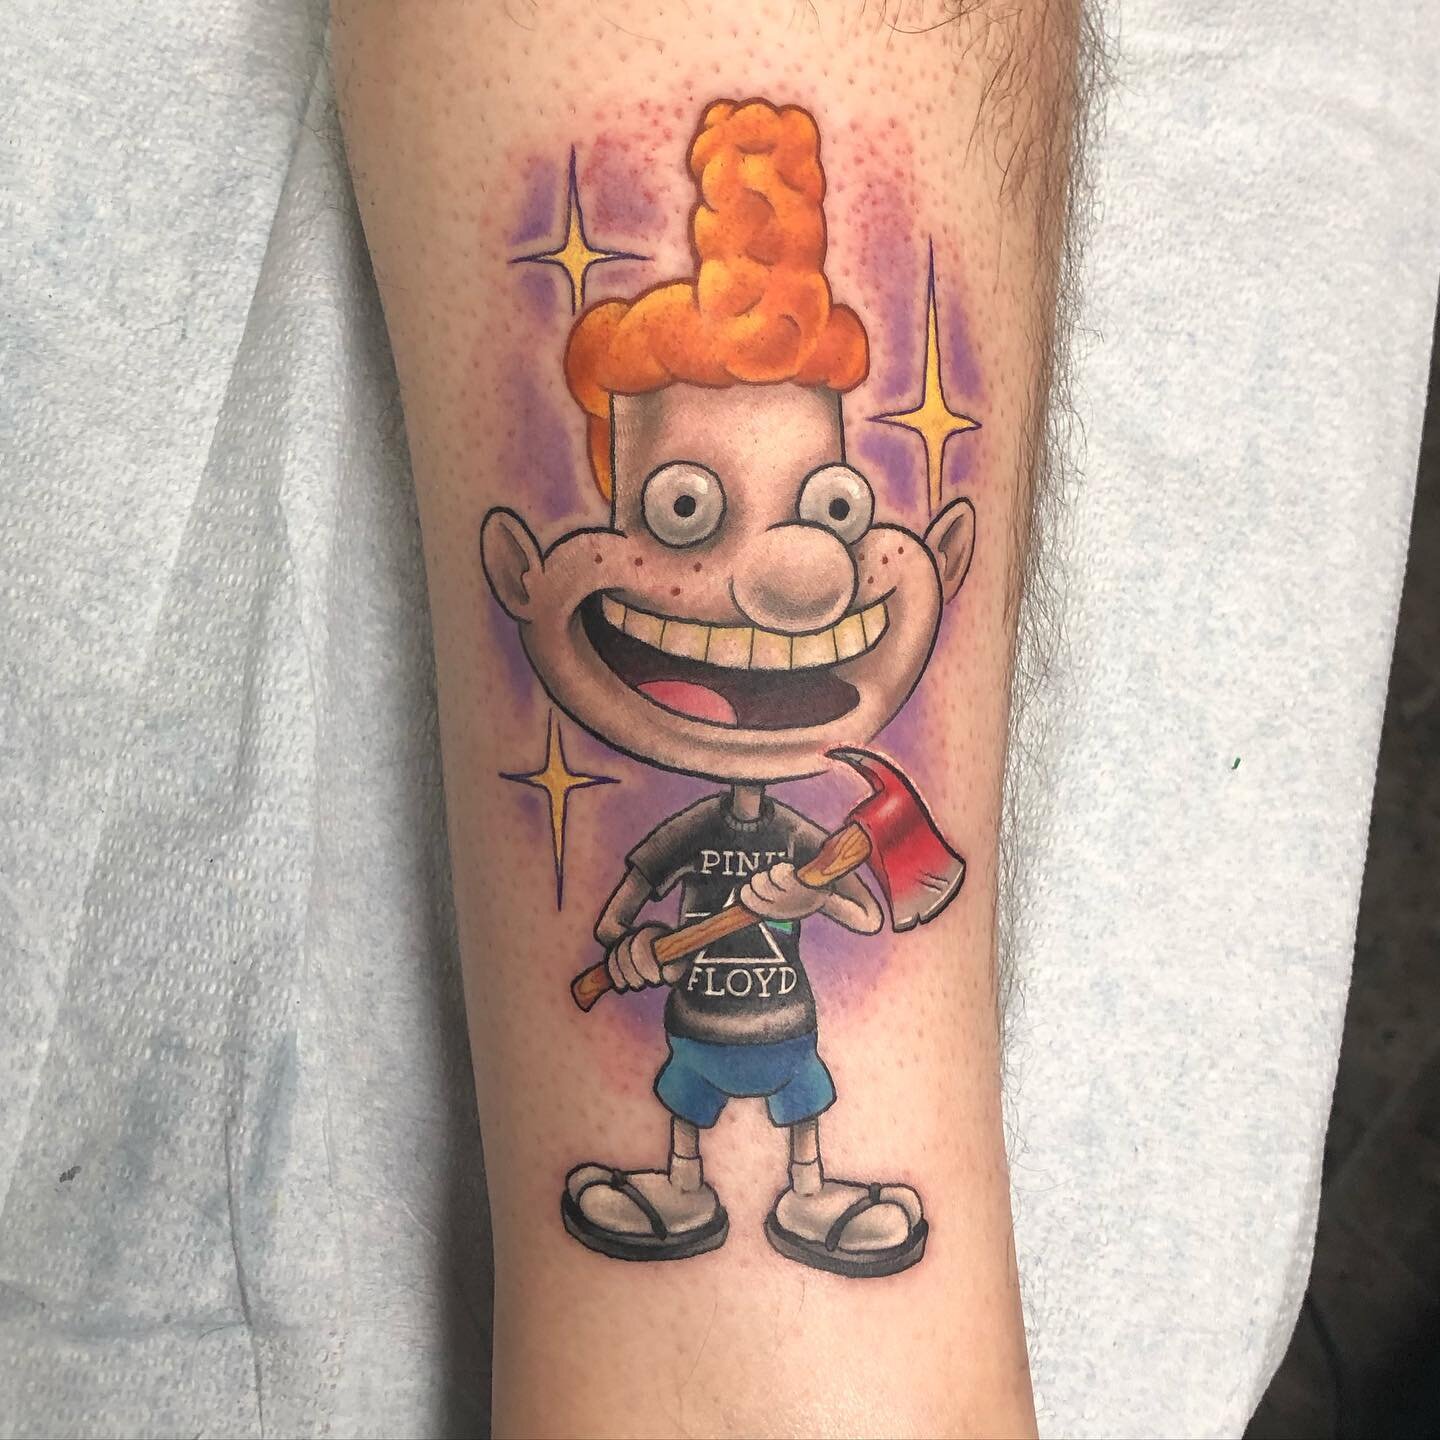 &ldquo;Careful with that axe Eugene&rdquo;  Not the best pics but you get the idea.  #pinkfloyd #pinkfloydtattoo #heyarnold #heyarnoldtattoo #90scartoons #tattoo# #newschooltattoo